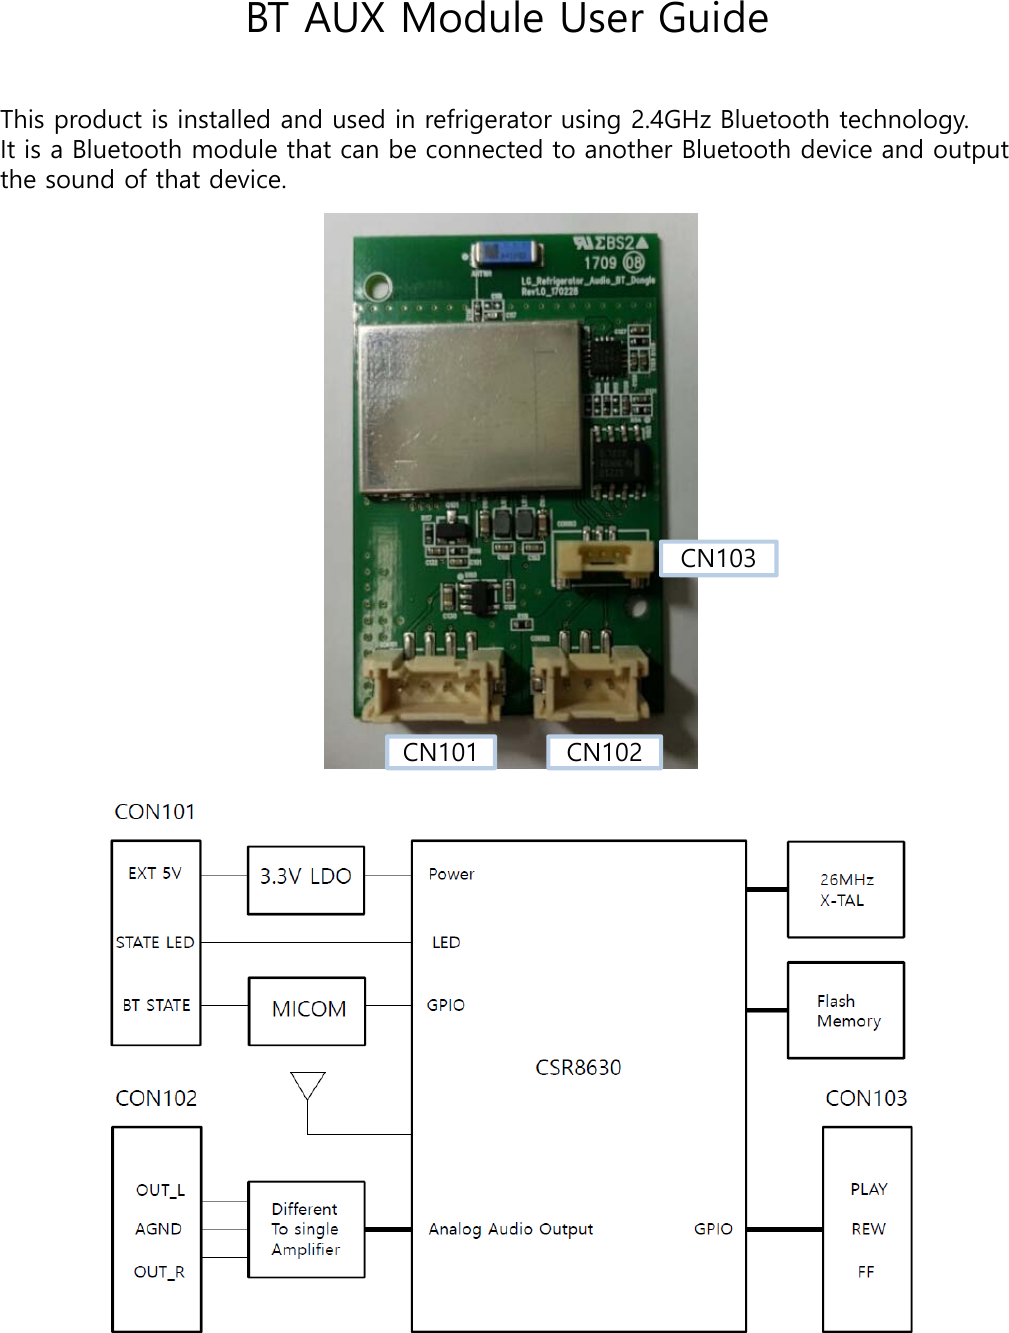 BT AUX Module User GuideThis product is installed and used in refrigerator using 2.4GHz Bluetooth technology.It is a Bluetooth module that can be connected to another Bluetooth device and outputthe sound of that device.CN103CN101 CN102